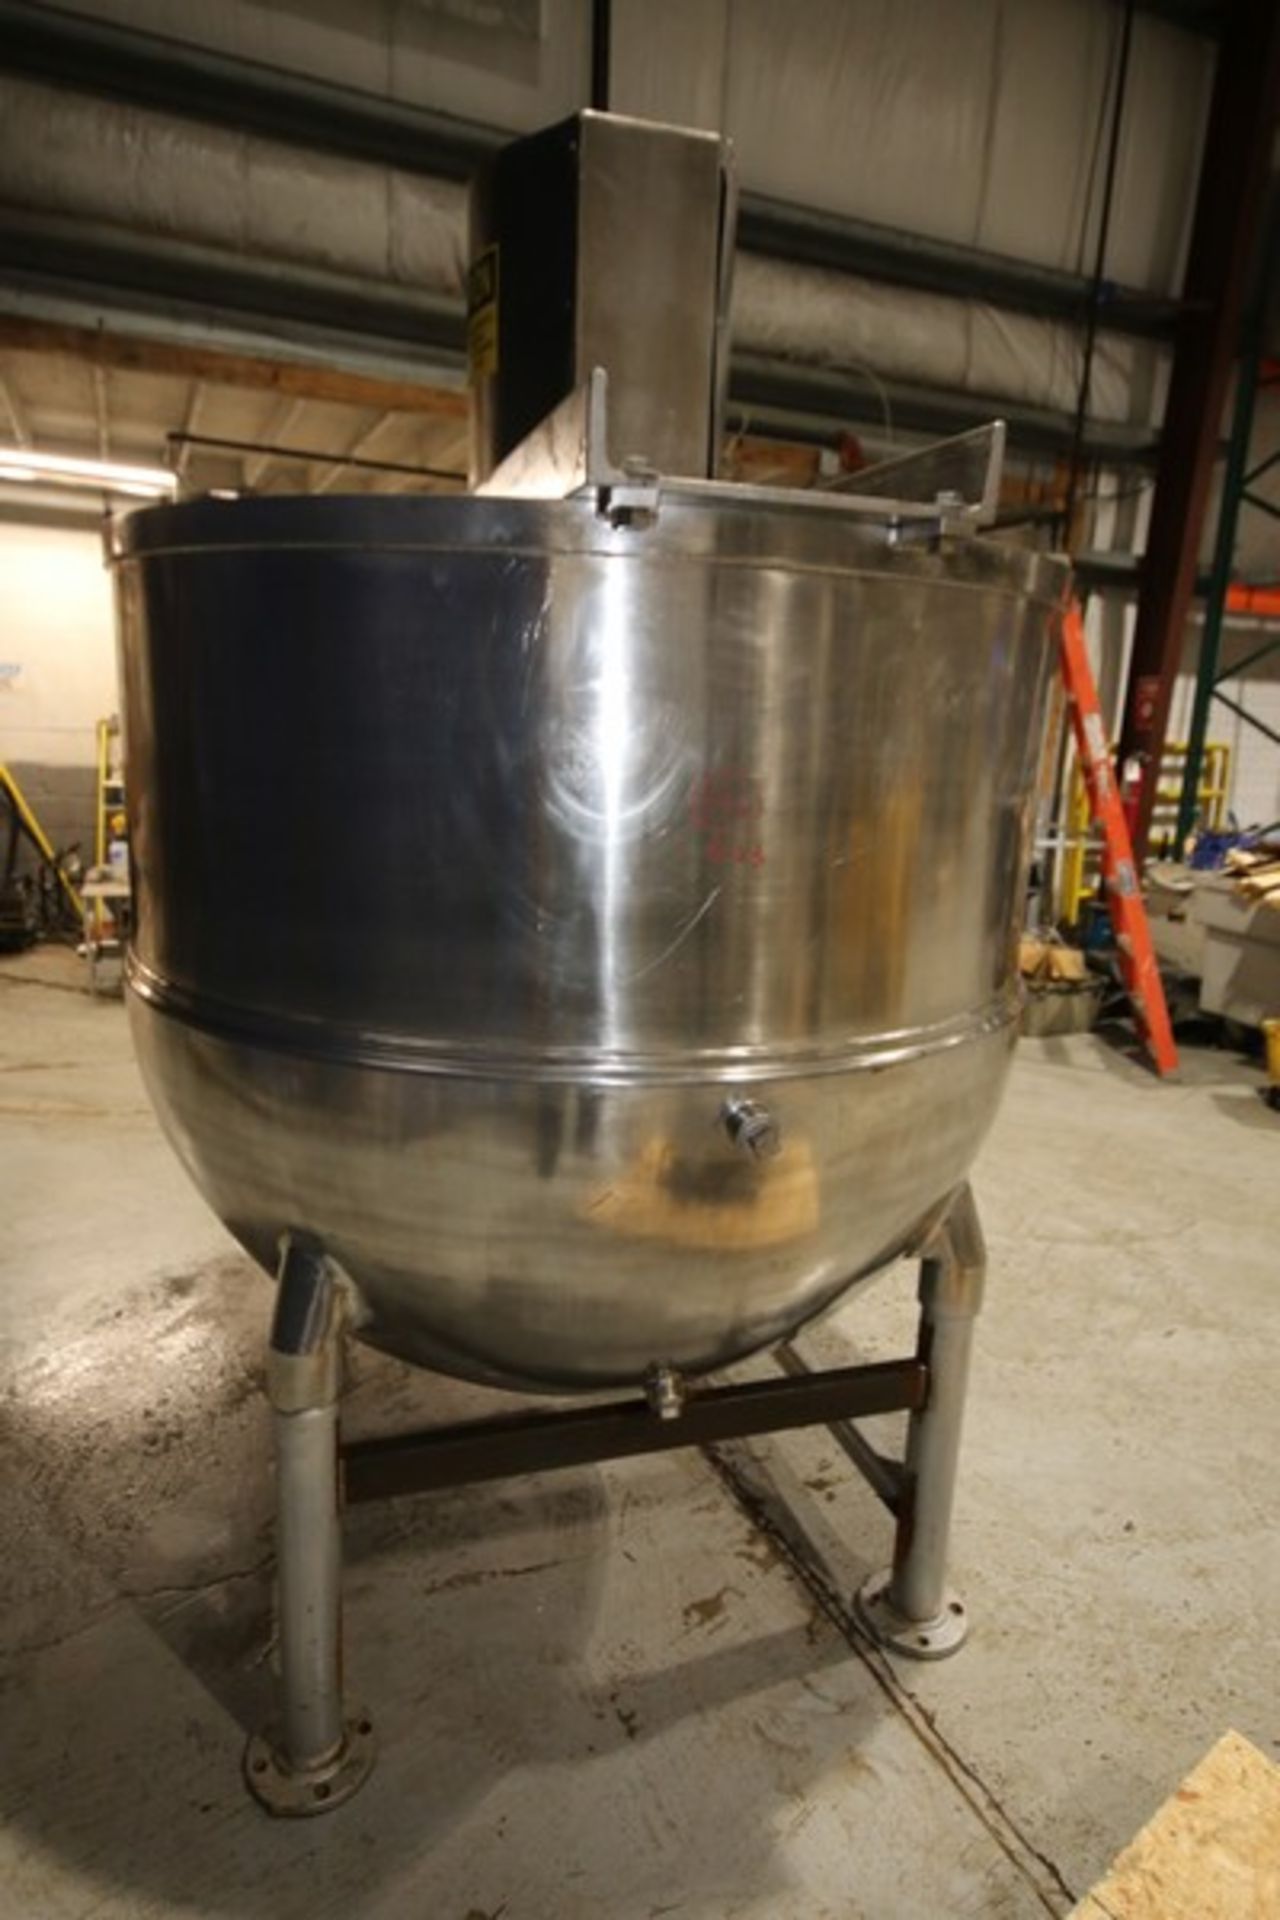 Groen 500 Gallon Jacketed S/S Kettle, Model 500, SN & BN 23122, with Bottom & Side Scrape Surface - Image 9 of 16